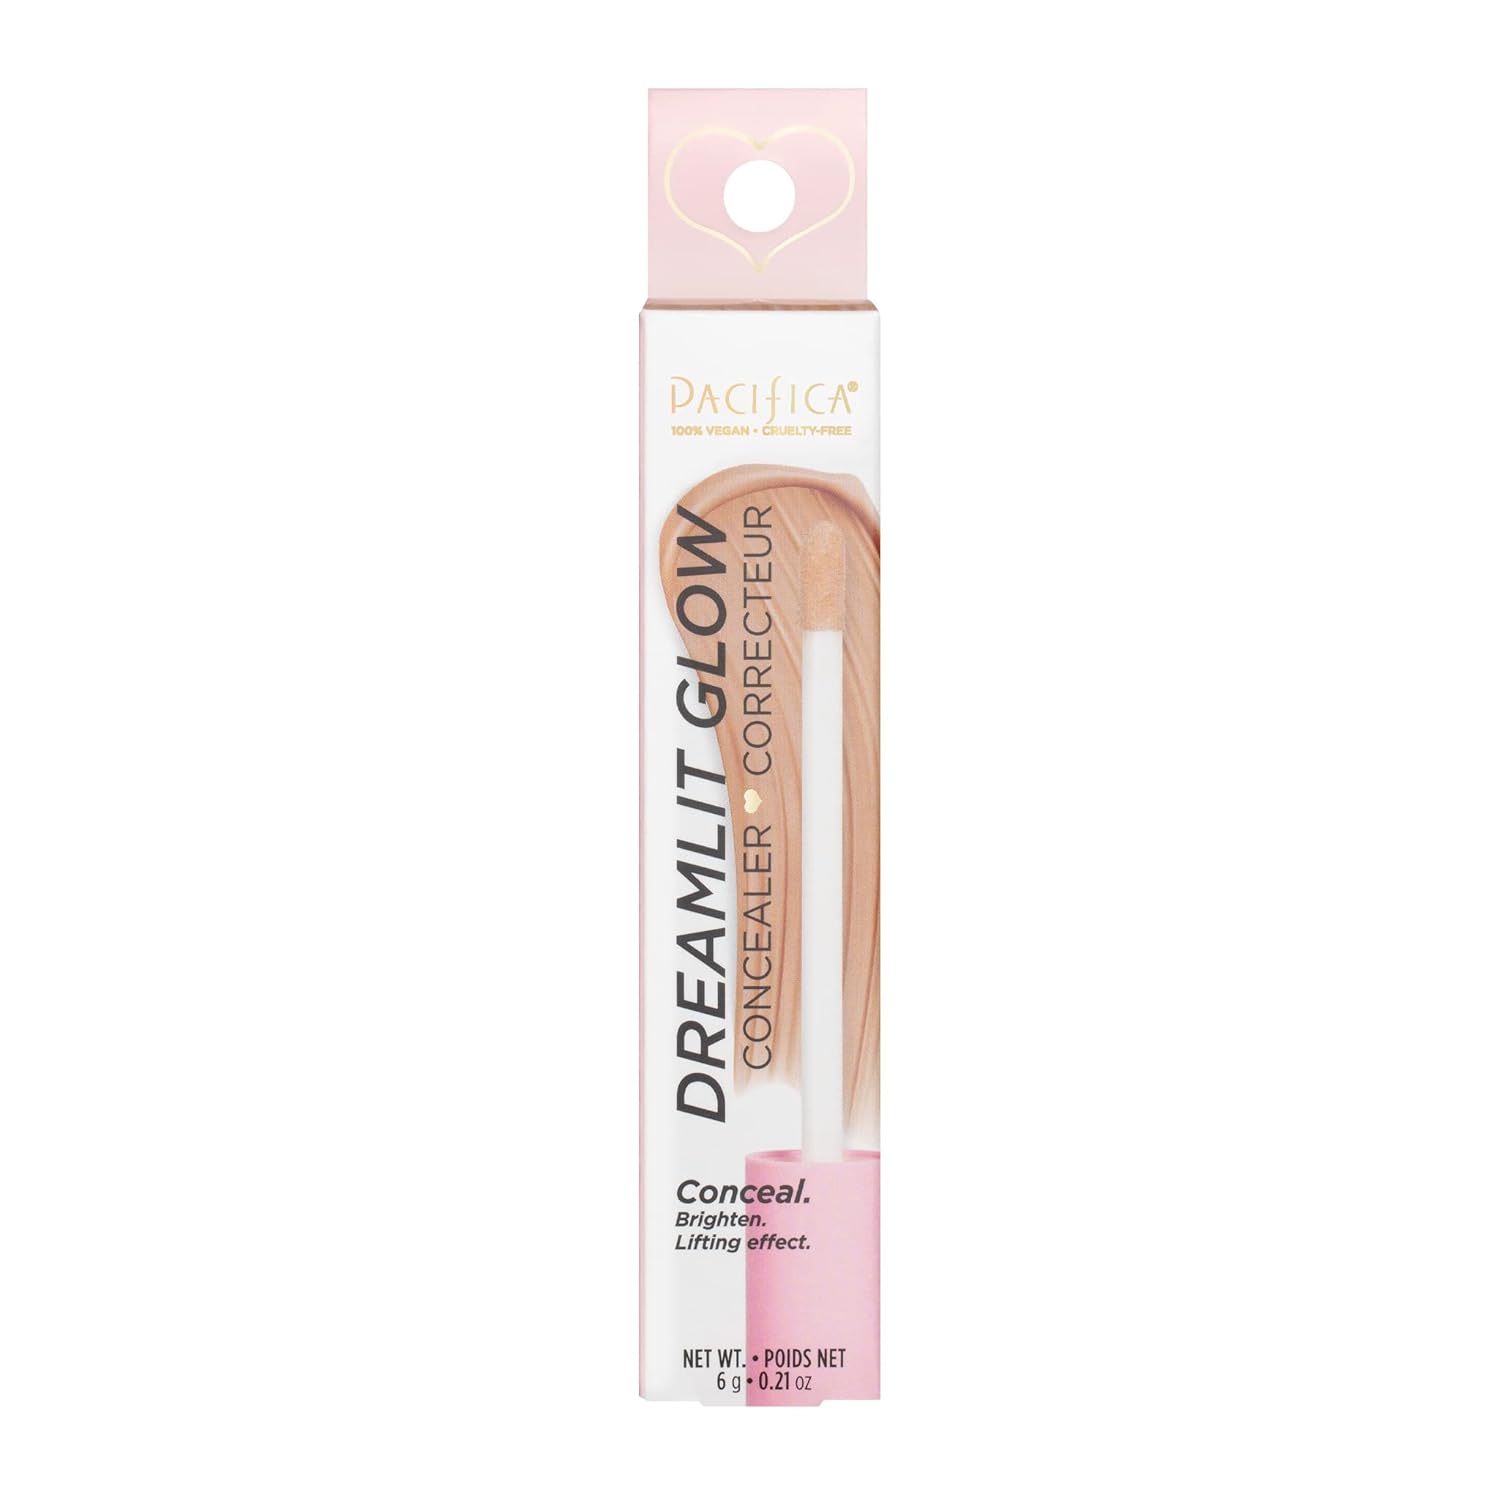 Pacifica Beauty, DreamLit Glow Concealer - Shade 07, Multi-Use Concealer, Conceals, Corrects, Covers, Puffy Eyes and Dark Circles Treatment, Plant-Based Formula, Lightweight, Long Lasting, Vegan, Tan : Beauty & Personal Care